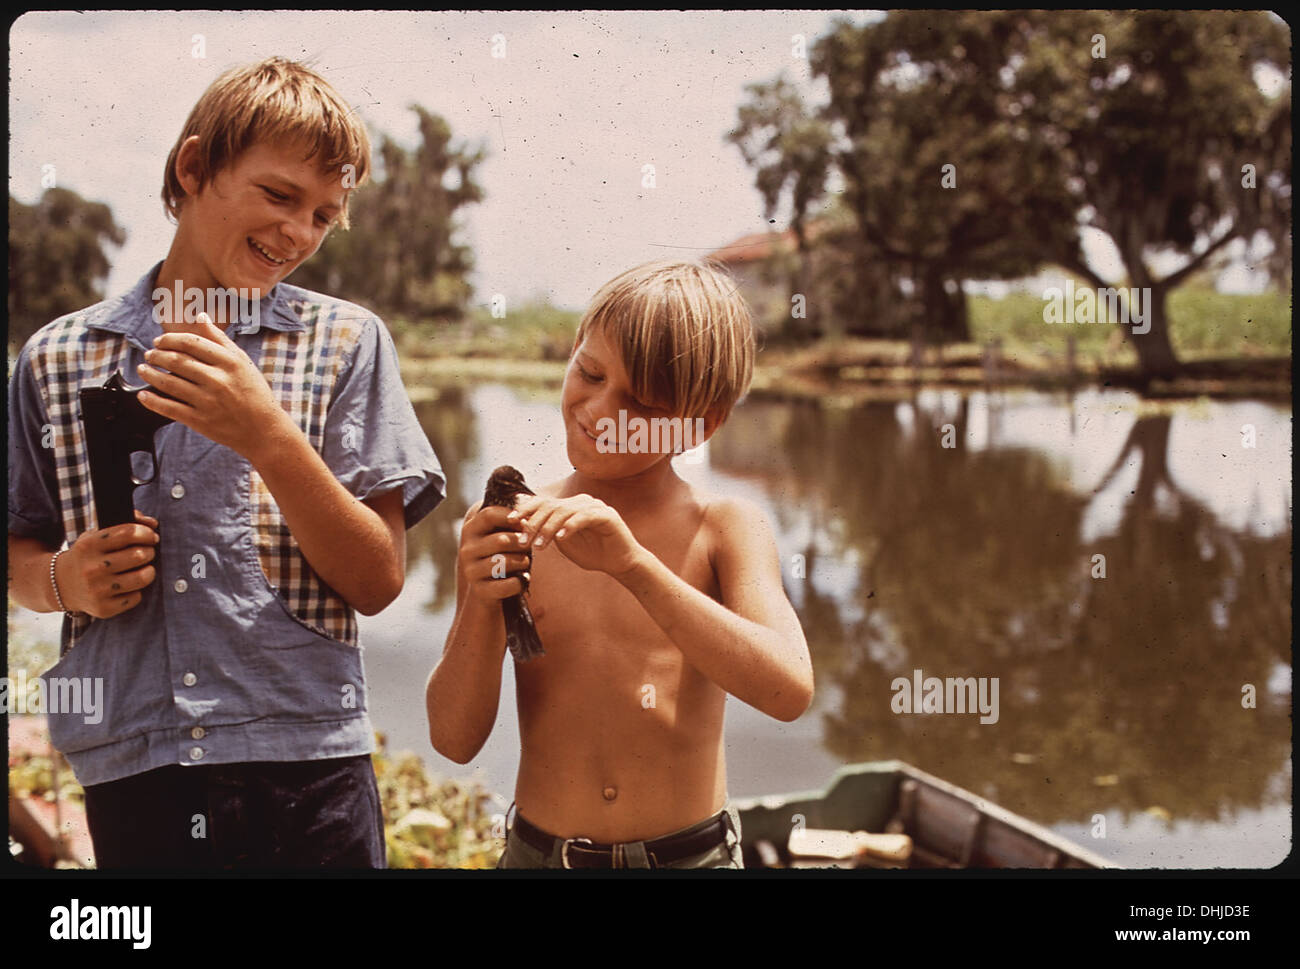 BOYS WITH AIRGUN AND BIRD. THESE FISHERMAN'S SONS LIVE IN BAYOU GAUCHE, DEEP IN THE WETLANDS OF LOUISIANA 211 Stock Photo